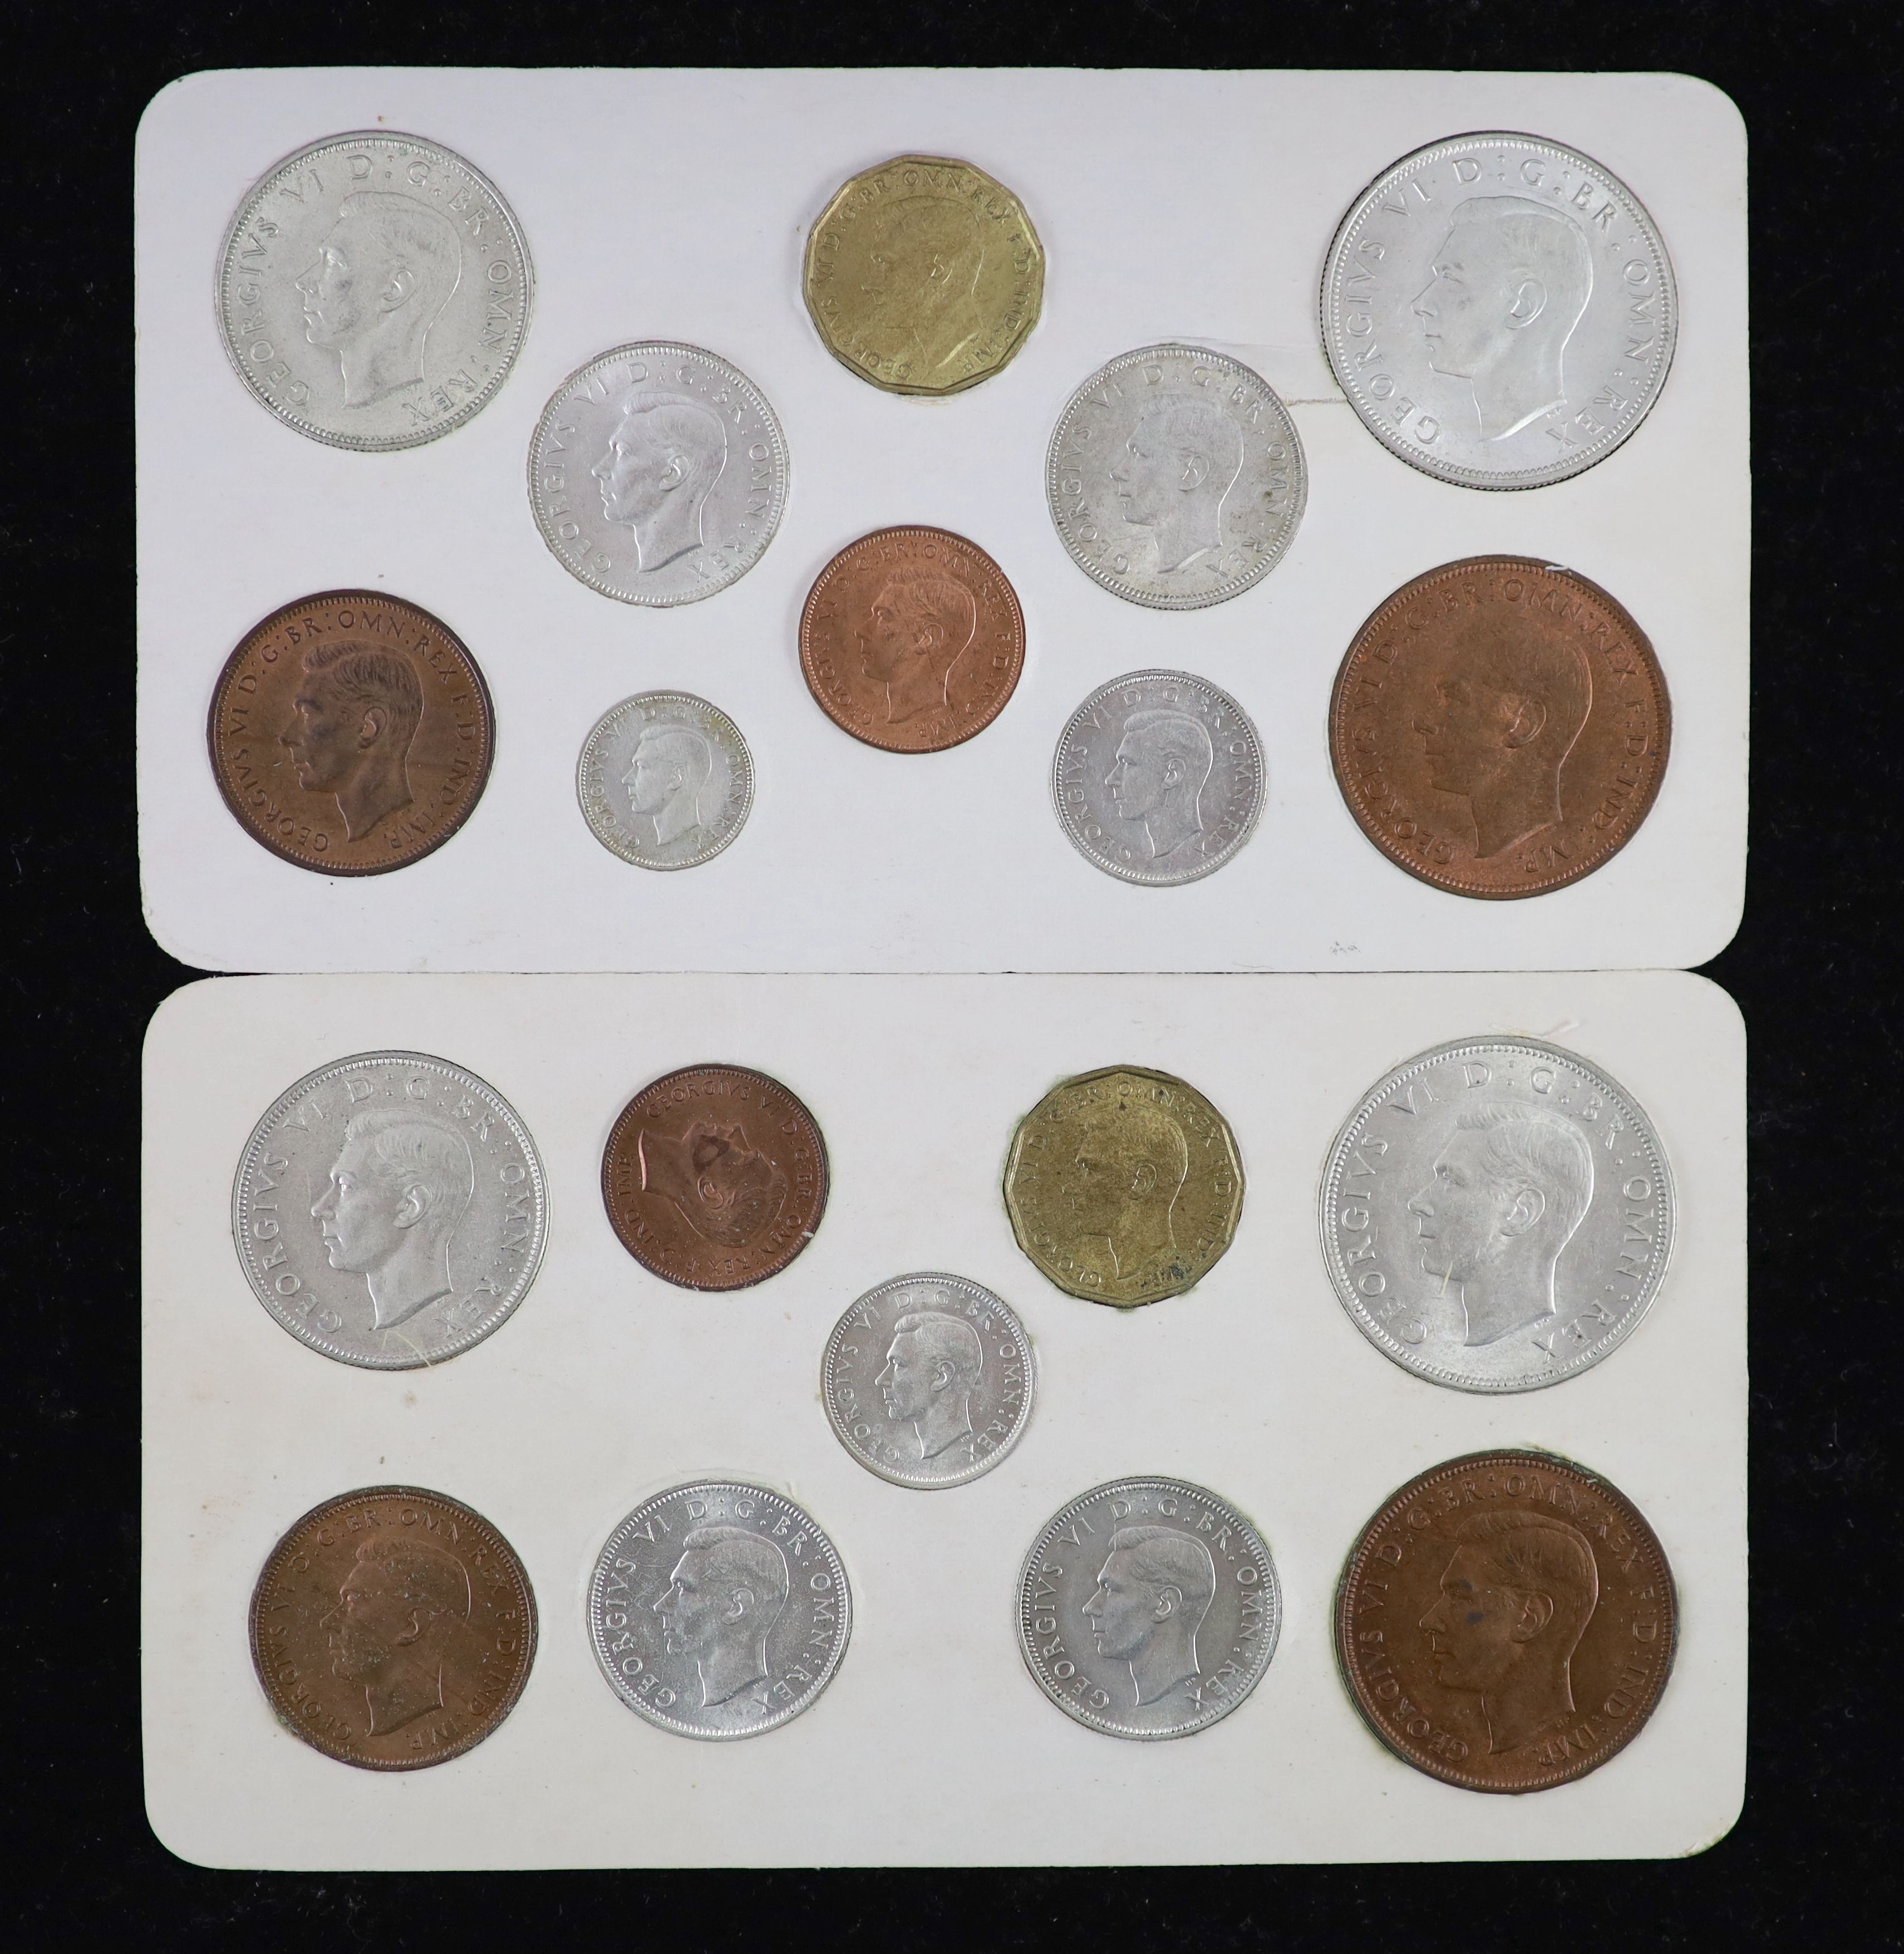 George VI specimen coin sets for 1944 and 1945, including the rare 1944 silver threepence, first coinage, all about EF or better